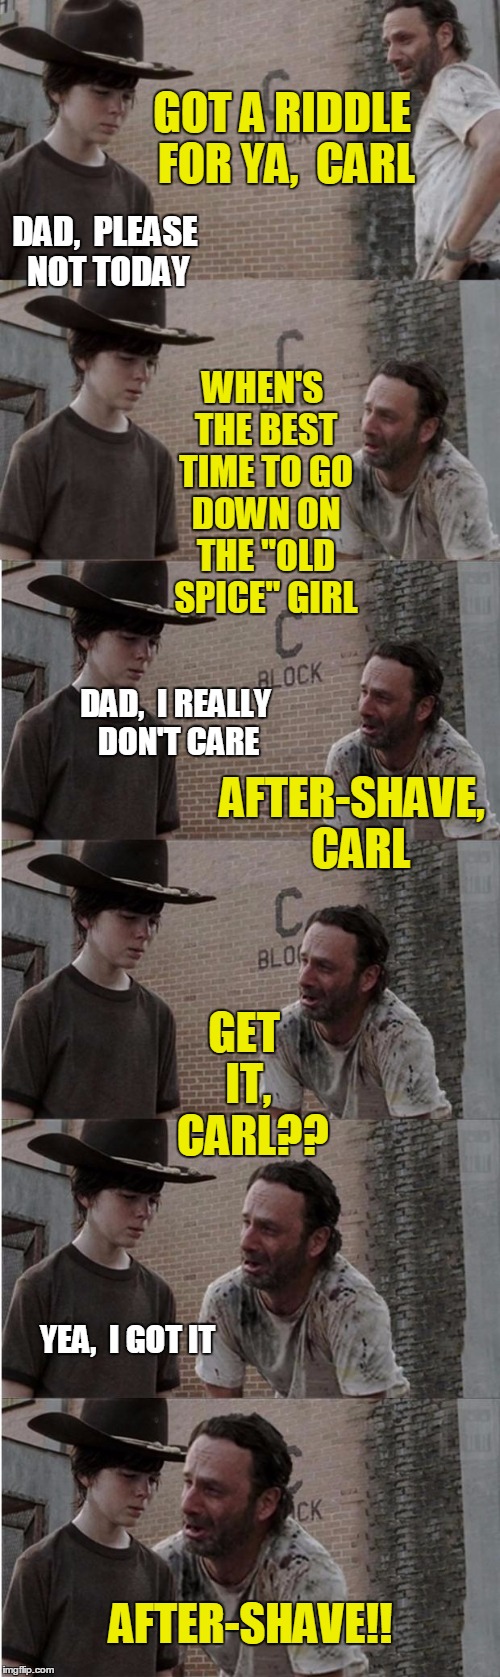 AFTER she shaves!  :-) |  GOT A RIDDLE FOR YA,  CARL; DAD,  PLEASE NOT TODAY; WHEN'S THE BEST TIME TO GO DOWN ON THE "OLD SPICE" GIRL; DAD,  I REALLY DON'T CARE; AFTER-SHAVE,  CARL; GET IT,  CARL?? AFTER-SHAVE!! YEA,  I GOT IT | image tagged in memes,rick and carl longer | made w/ Imgflip meme maker